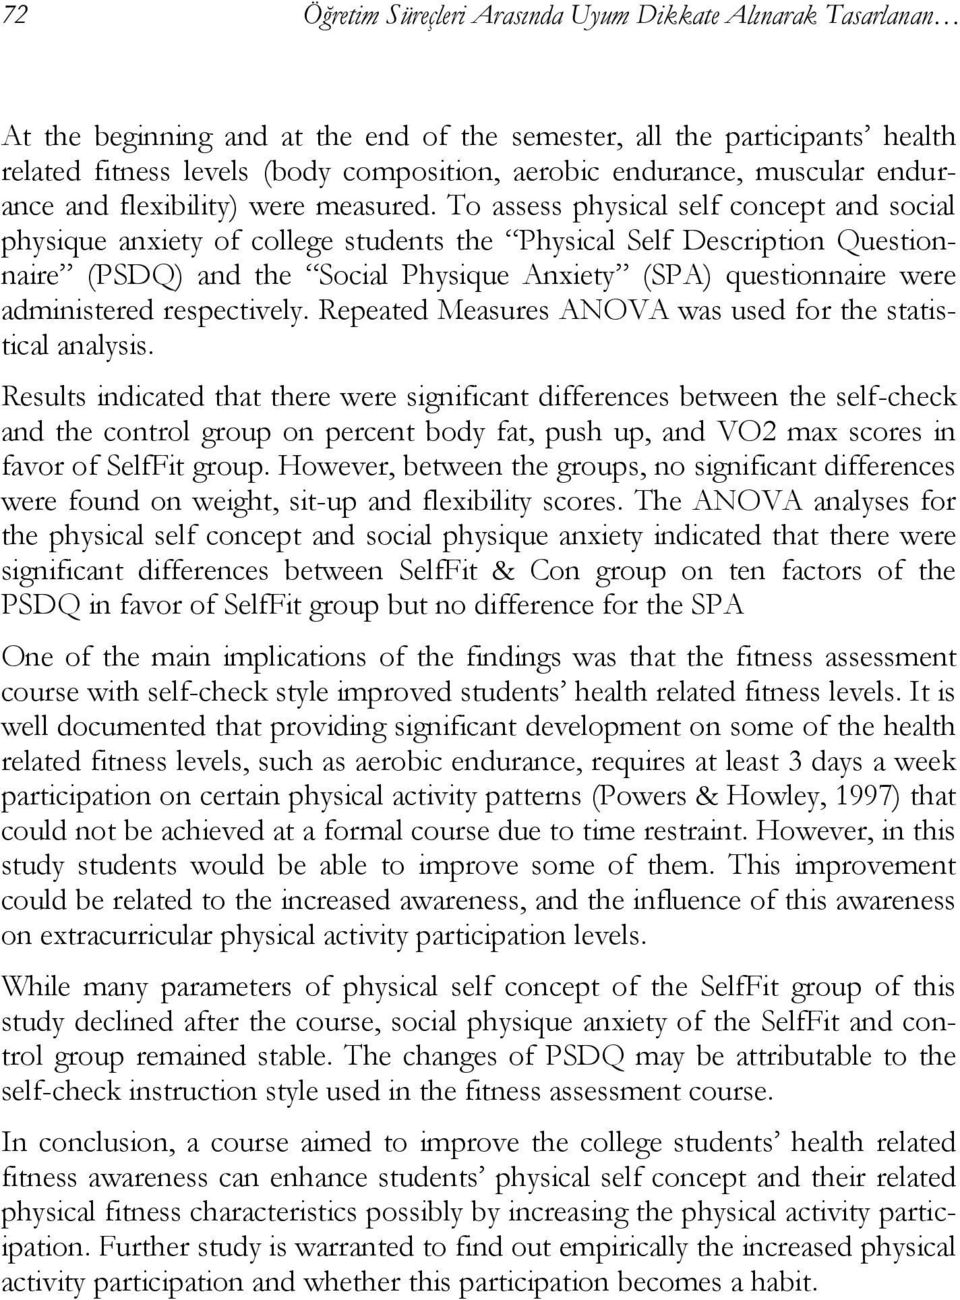 To assess physical self concept and social physique anxiety of college students the Physical Self Description Questionnaire (PSDQ) and the Social Physique Anxiety (SPA) questionnaire were